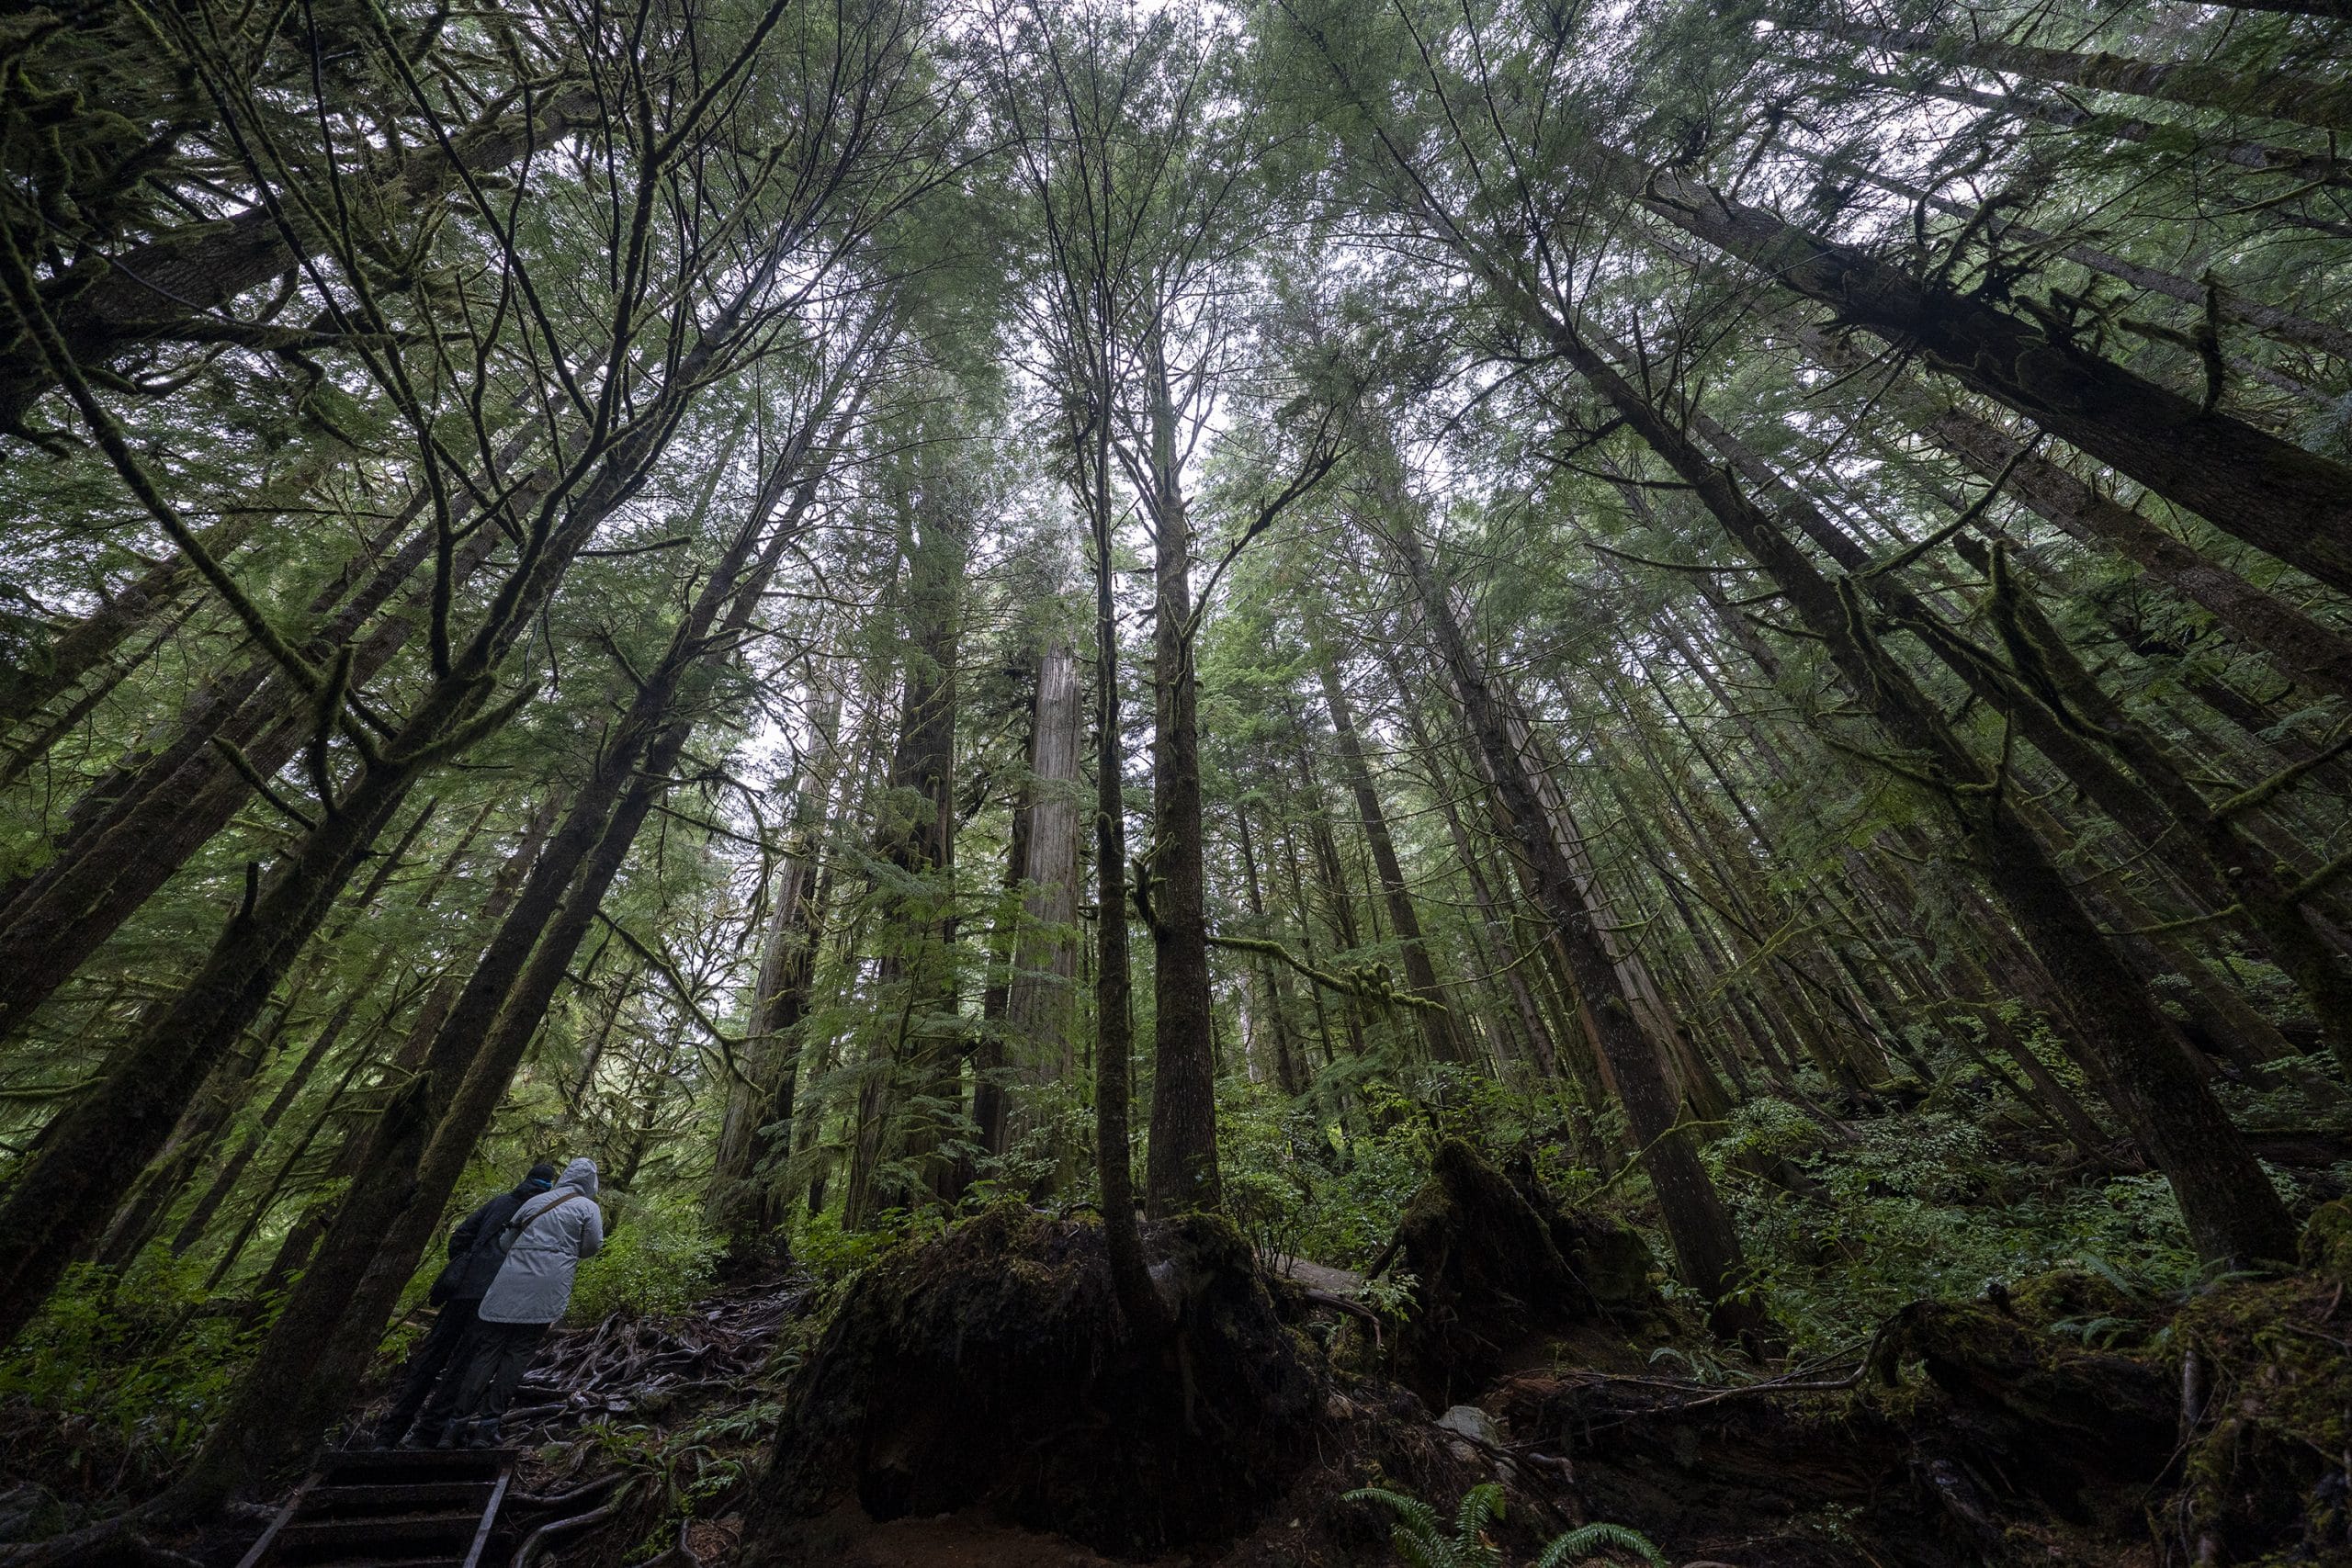 B.C. government plans to further protect old growth